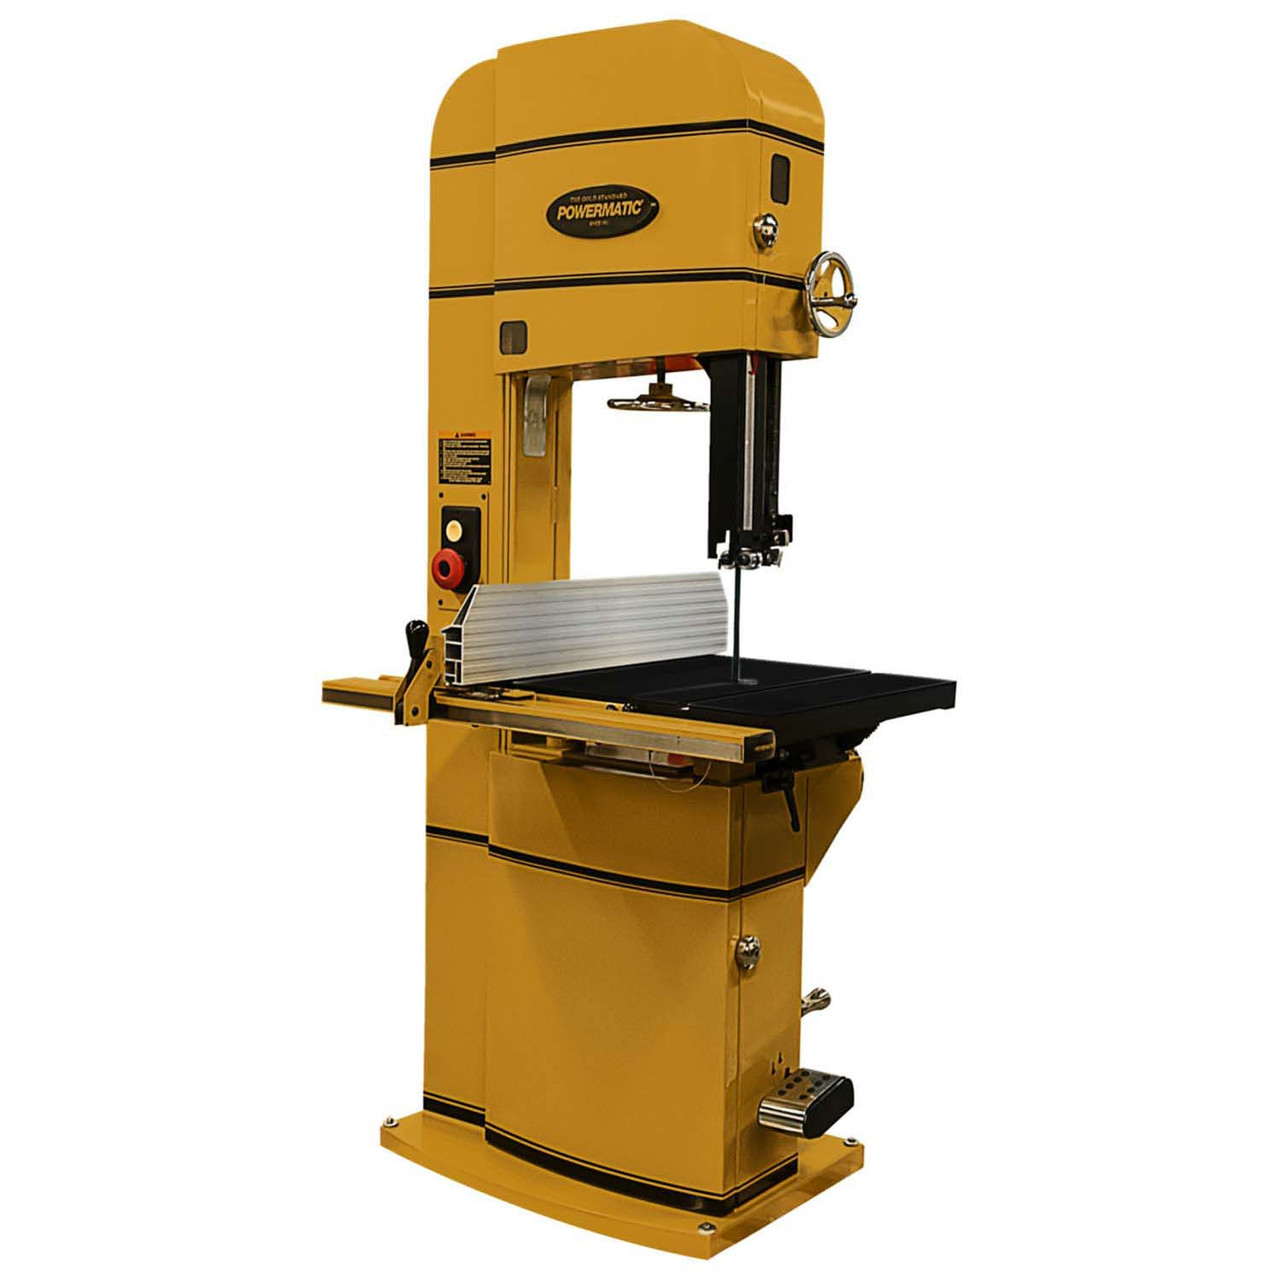 Powermatic, PM1-1791800BT, PM1800BT 18" Bandsaw with ArmorGlide, 5HP 1PH 230V